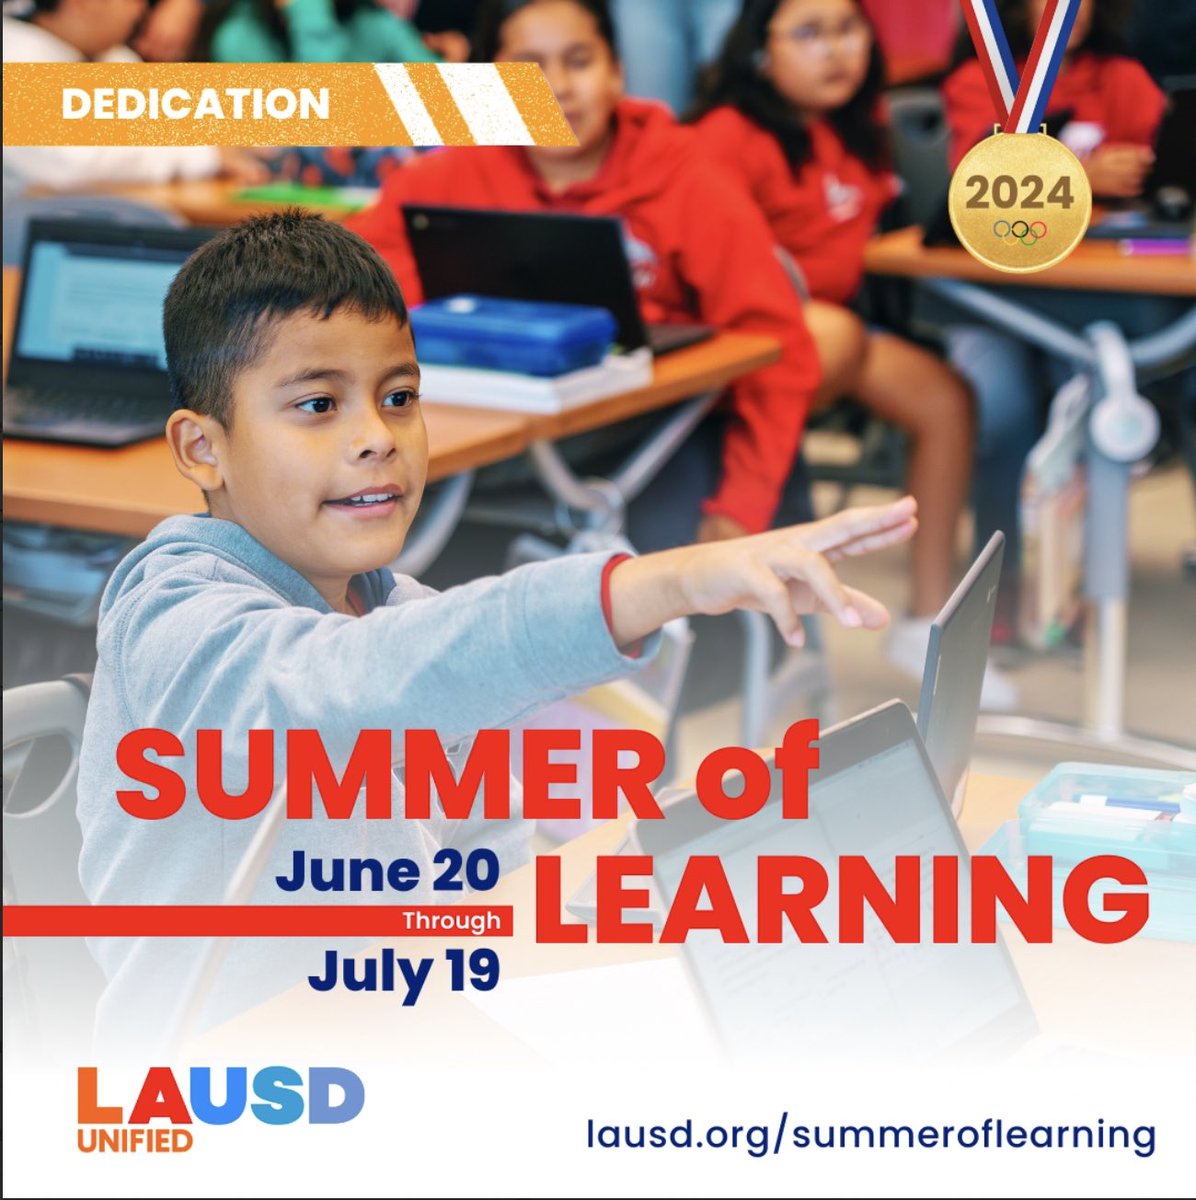 #summeroflearning begins 6/20. ⁦@LASchools⁩ we are dedicated to provide our UTK-12 students a dynamic slate of summer school programs. For seniors, there are credit recovery opportunities, ⁦@BTBLA⁩ will offer enrichment programs, and meals will be provided.